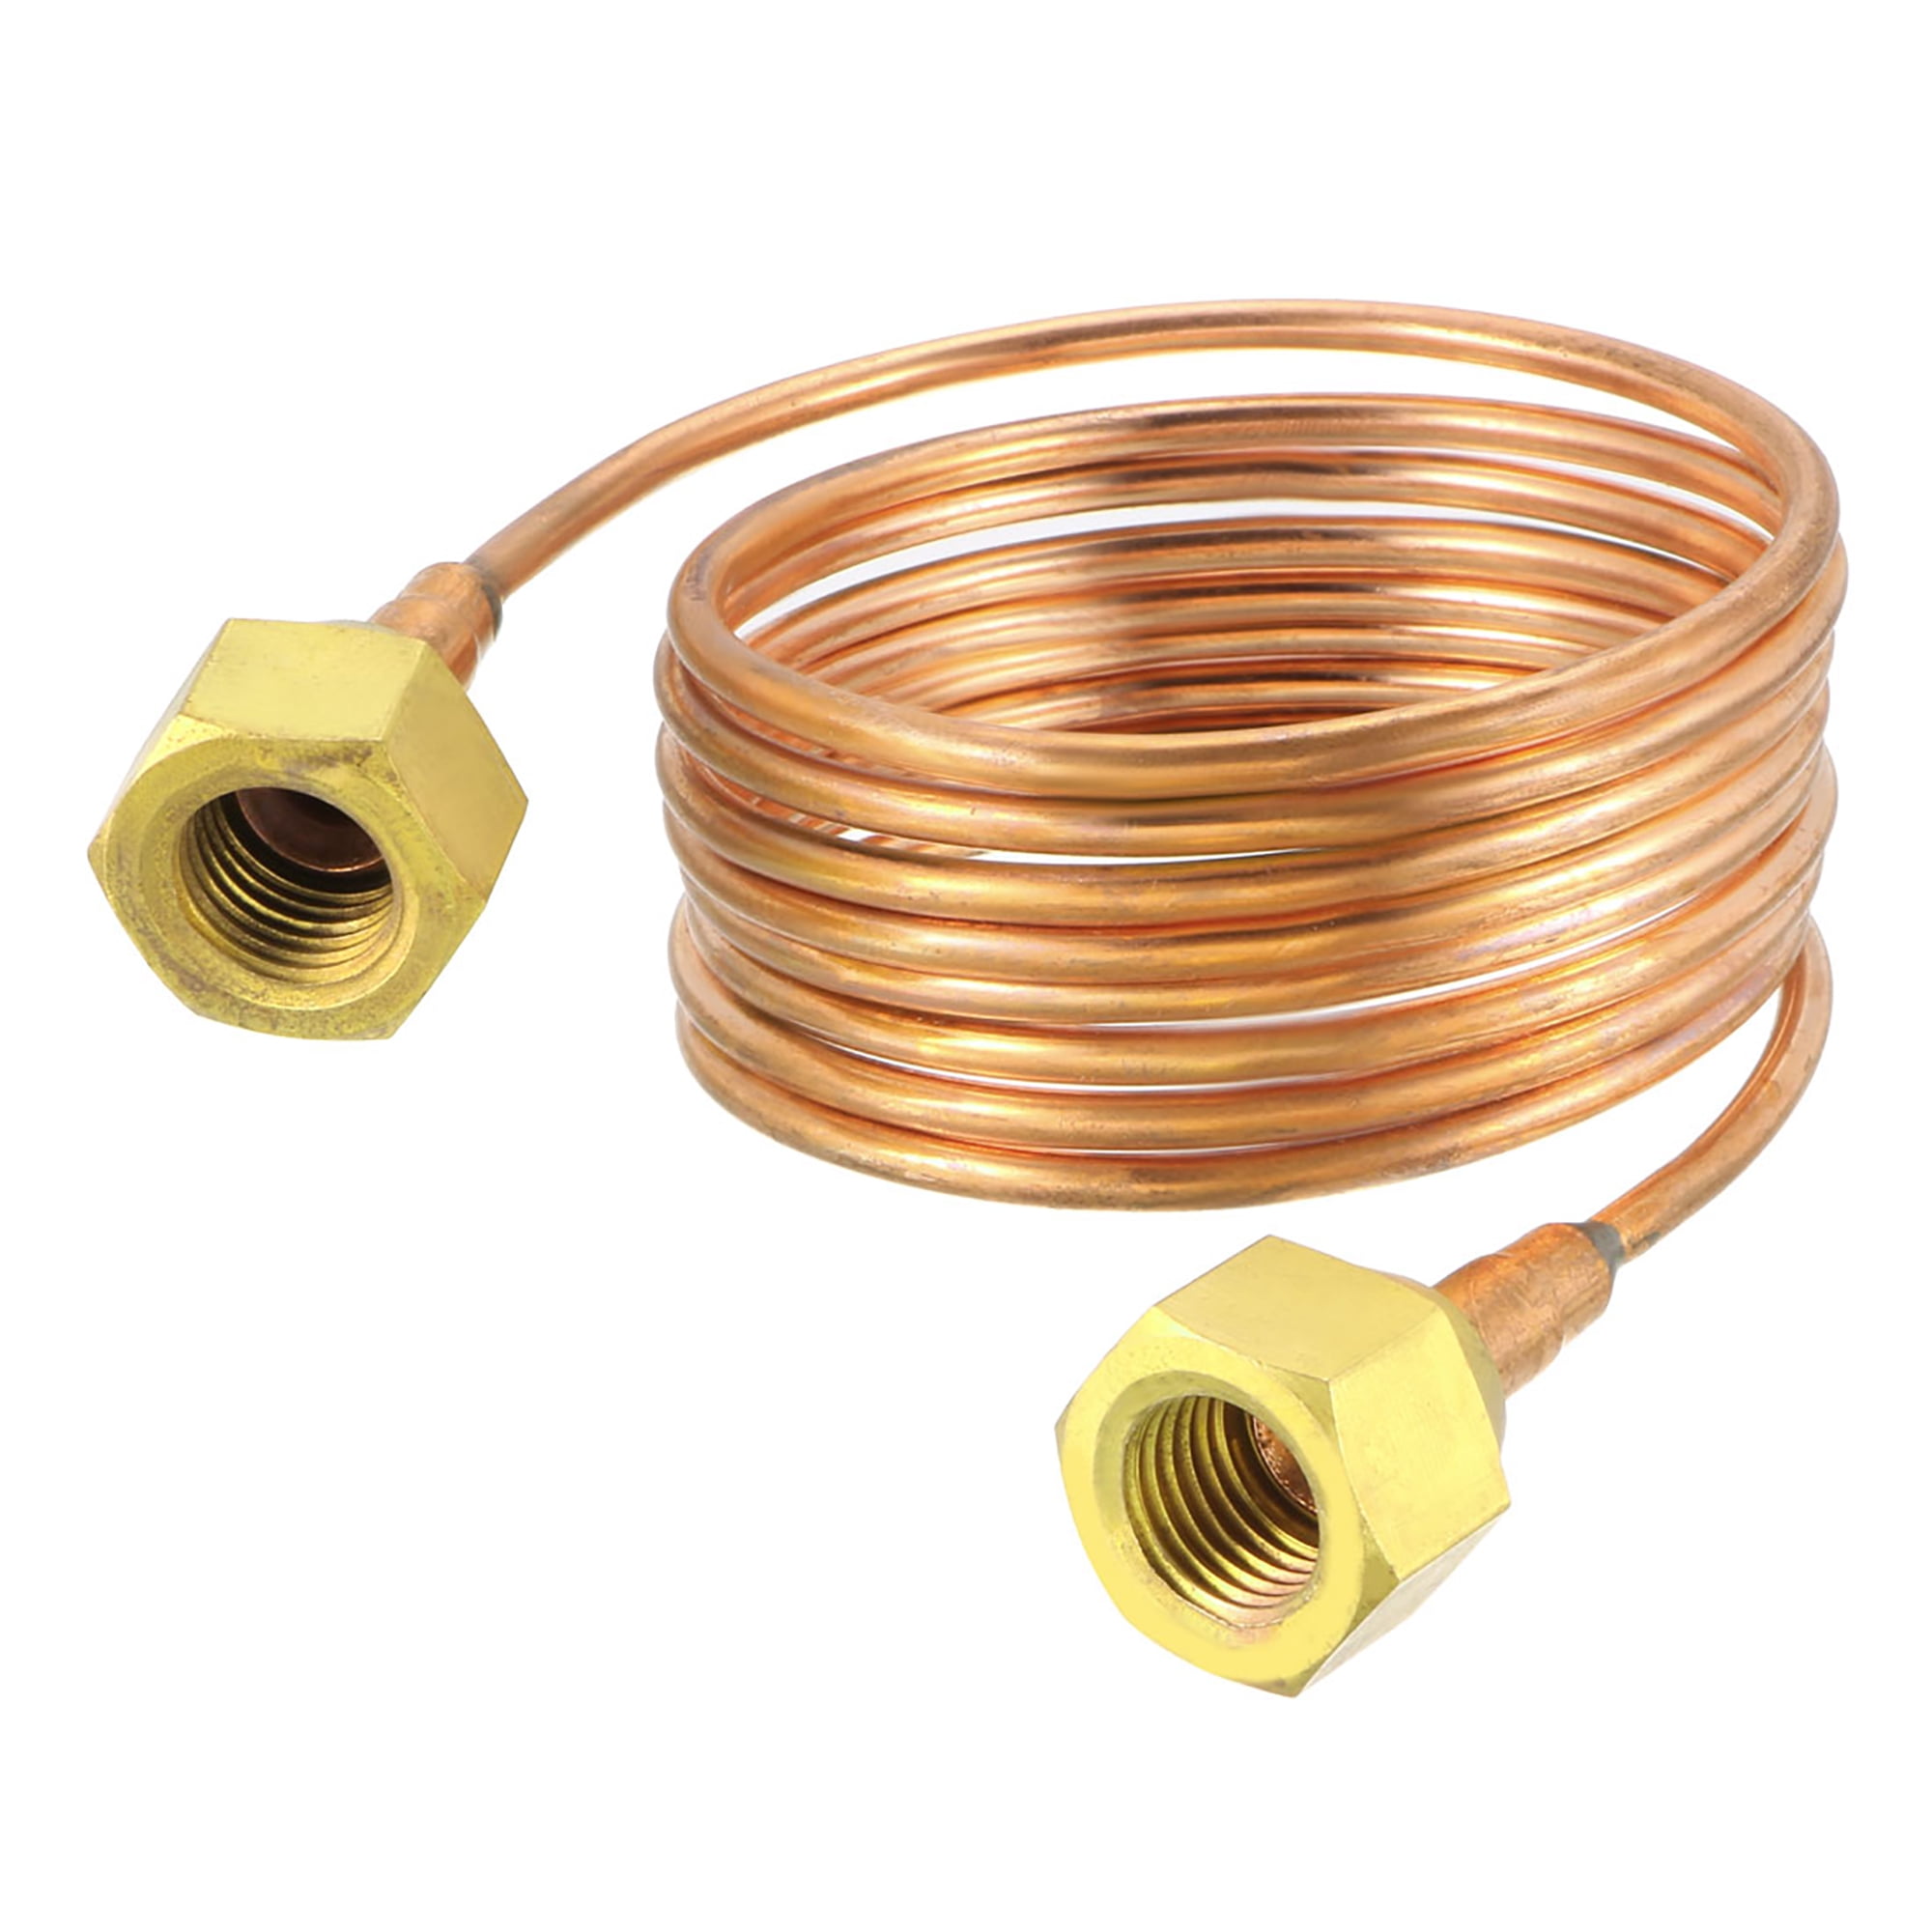 Tube Flare Fitting Copper Tube 5.2mm OD 3.2mm ID for Refrigeration Tubing 10pcs 